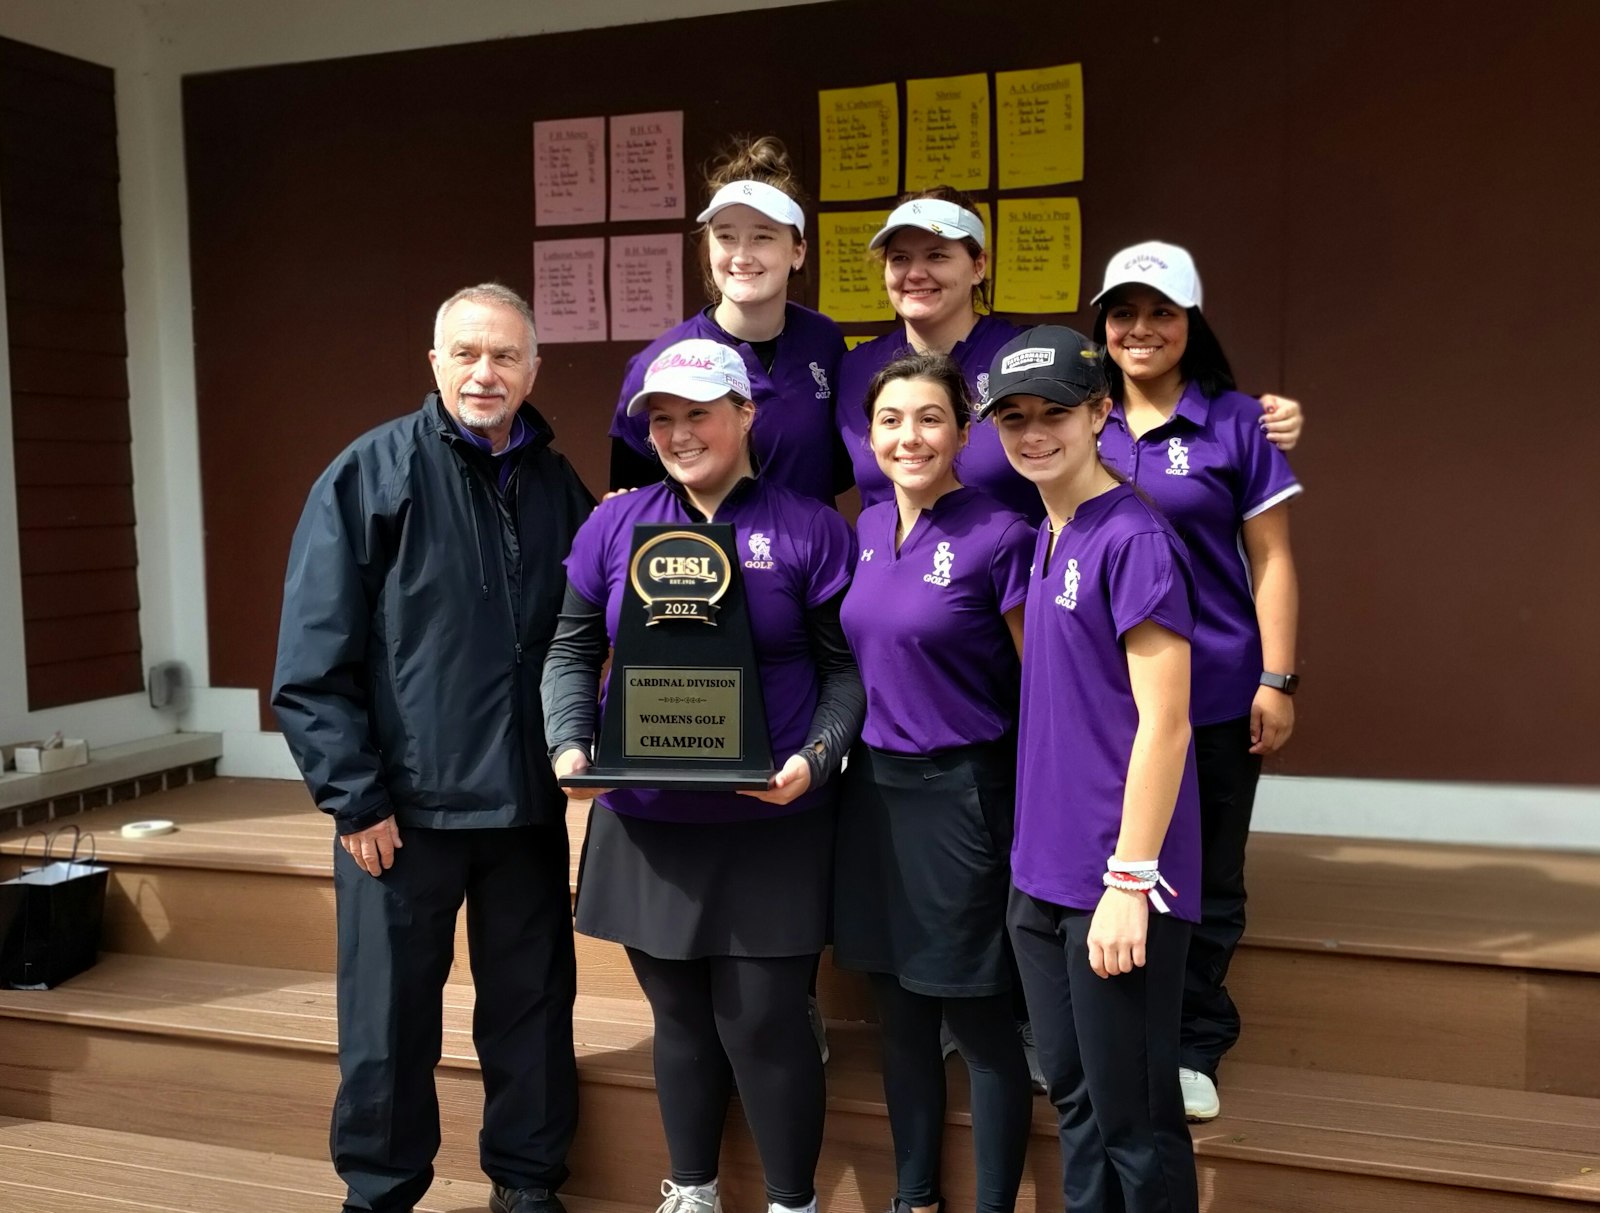 Rachel Fay holds the Cardinal Division trophy, the first Catholic League golf championship for St. Catherine of Siena. Her teammates are Joey McQuaid and Sydney Schafer in the front row, and behind them Brenna Cavanaugh, Abby Raben and Lucy Krichko. Orrin Tibbits has  coached the sport at St. Catherine since its inauguration five years ago.